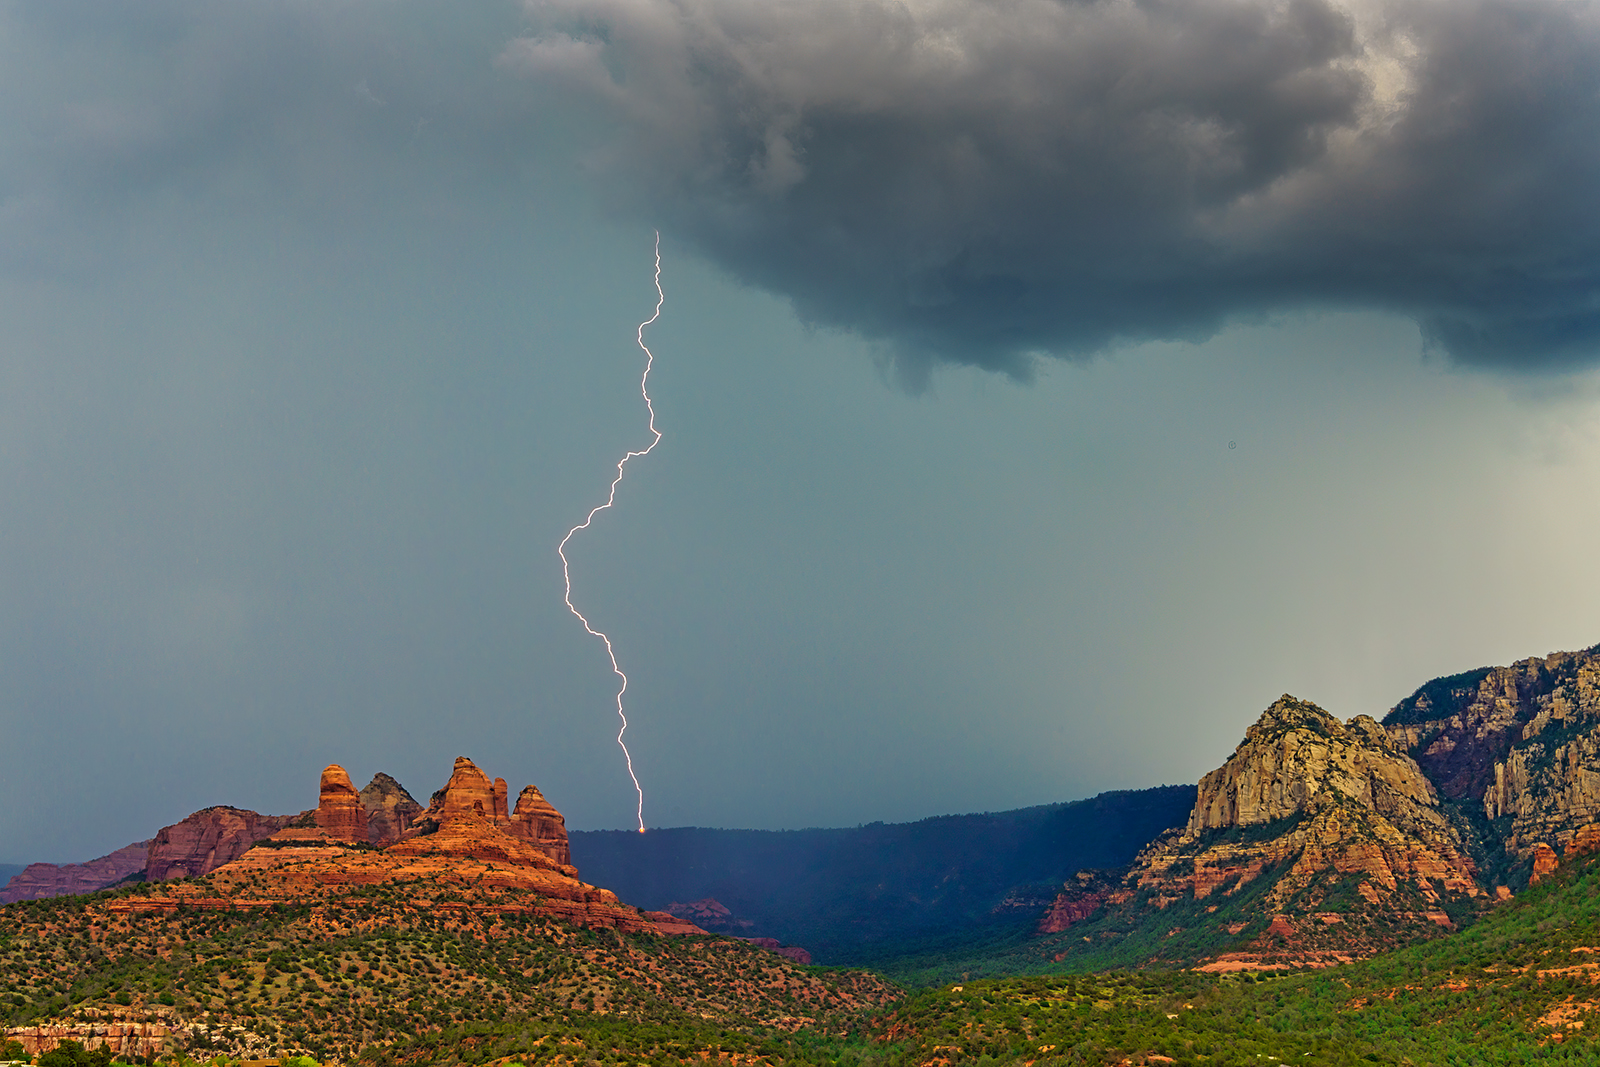 Photo by Robert Shuman  |  Lightning strike on the rim with a rare fire that the lightning caused